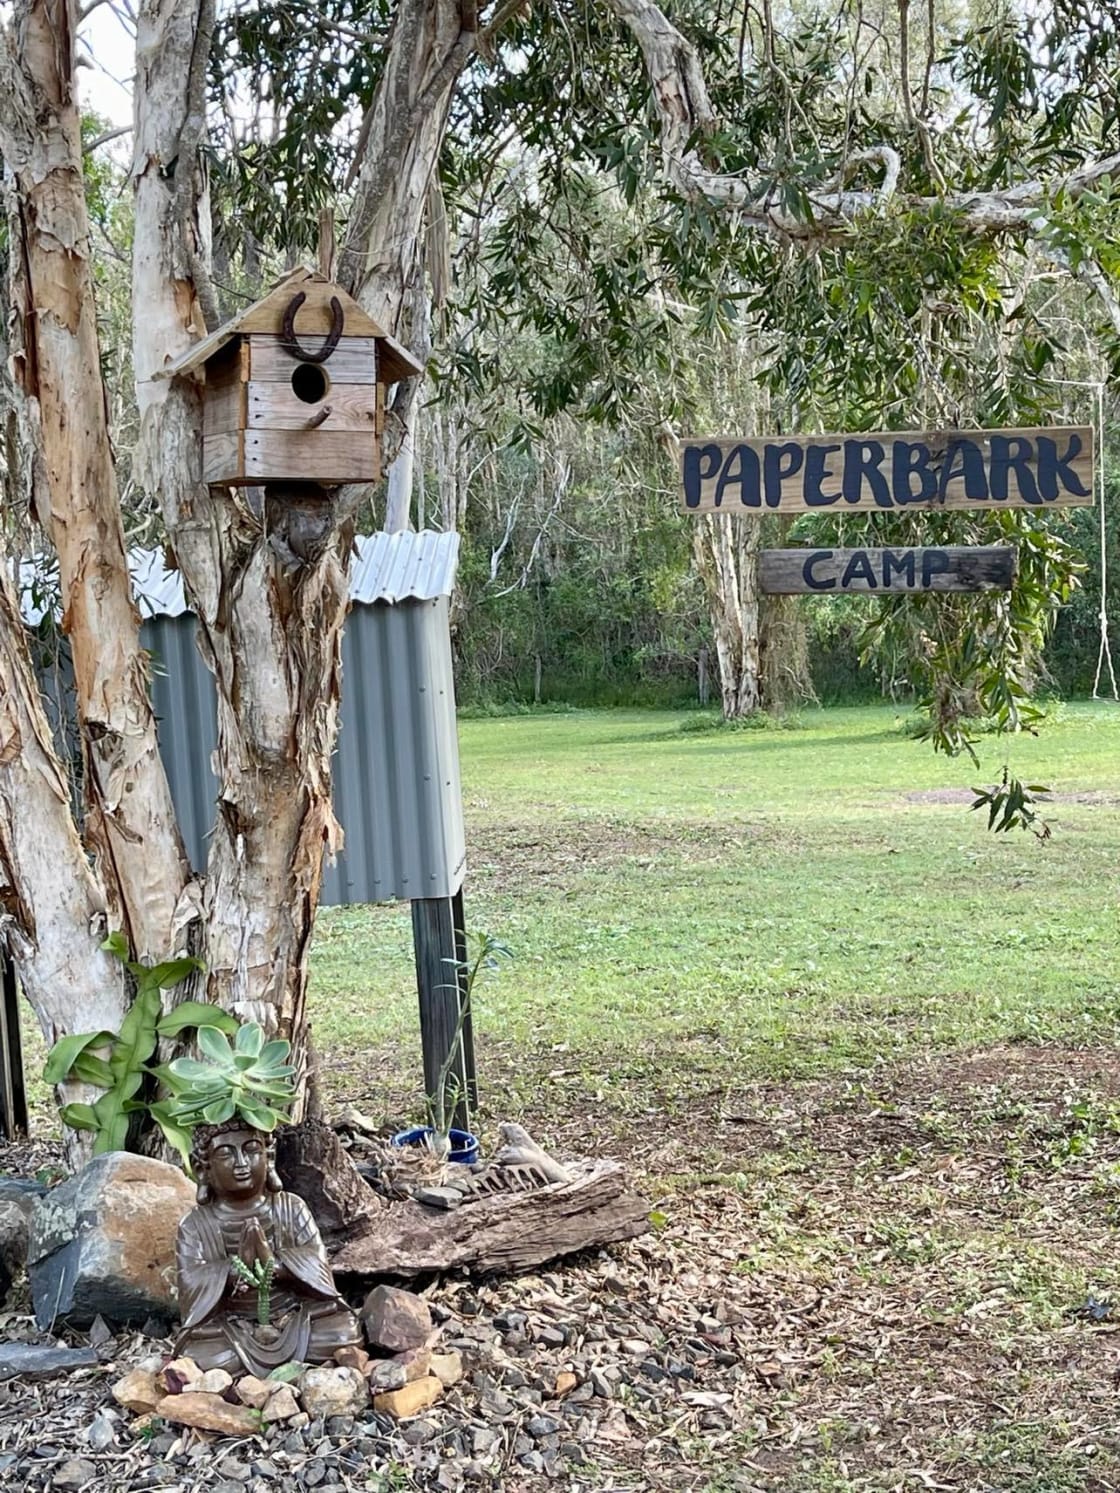 WELCOME TO PAPERBARK CAMP!